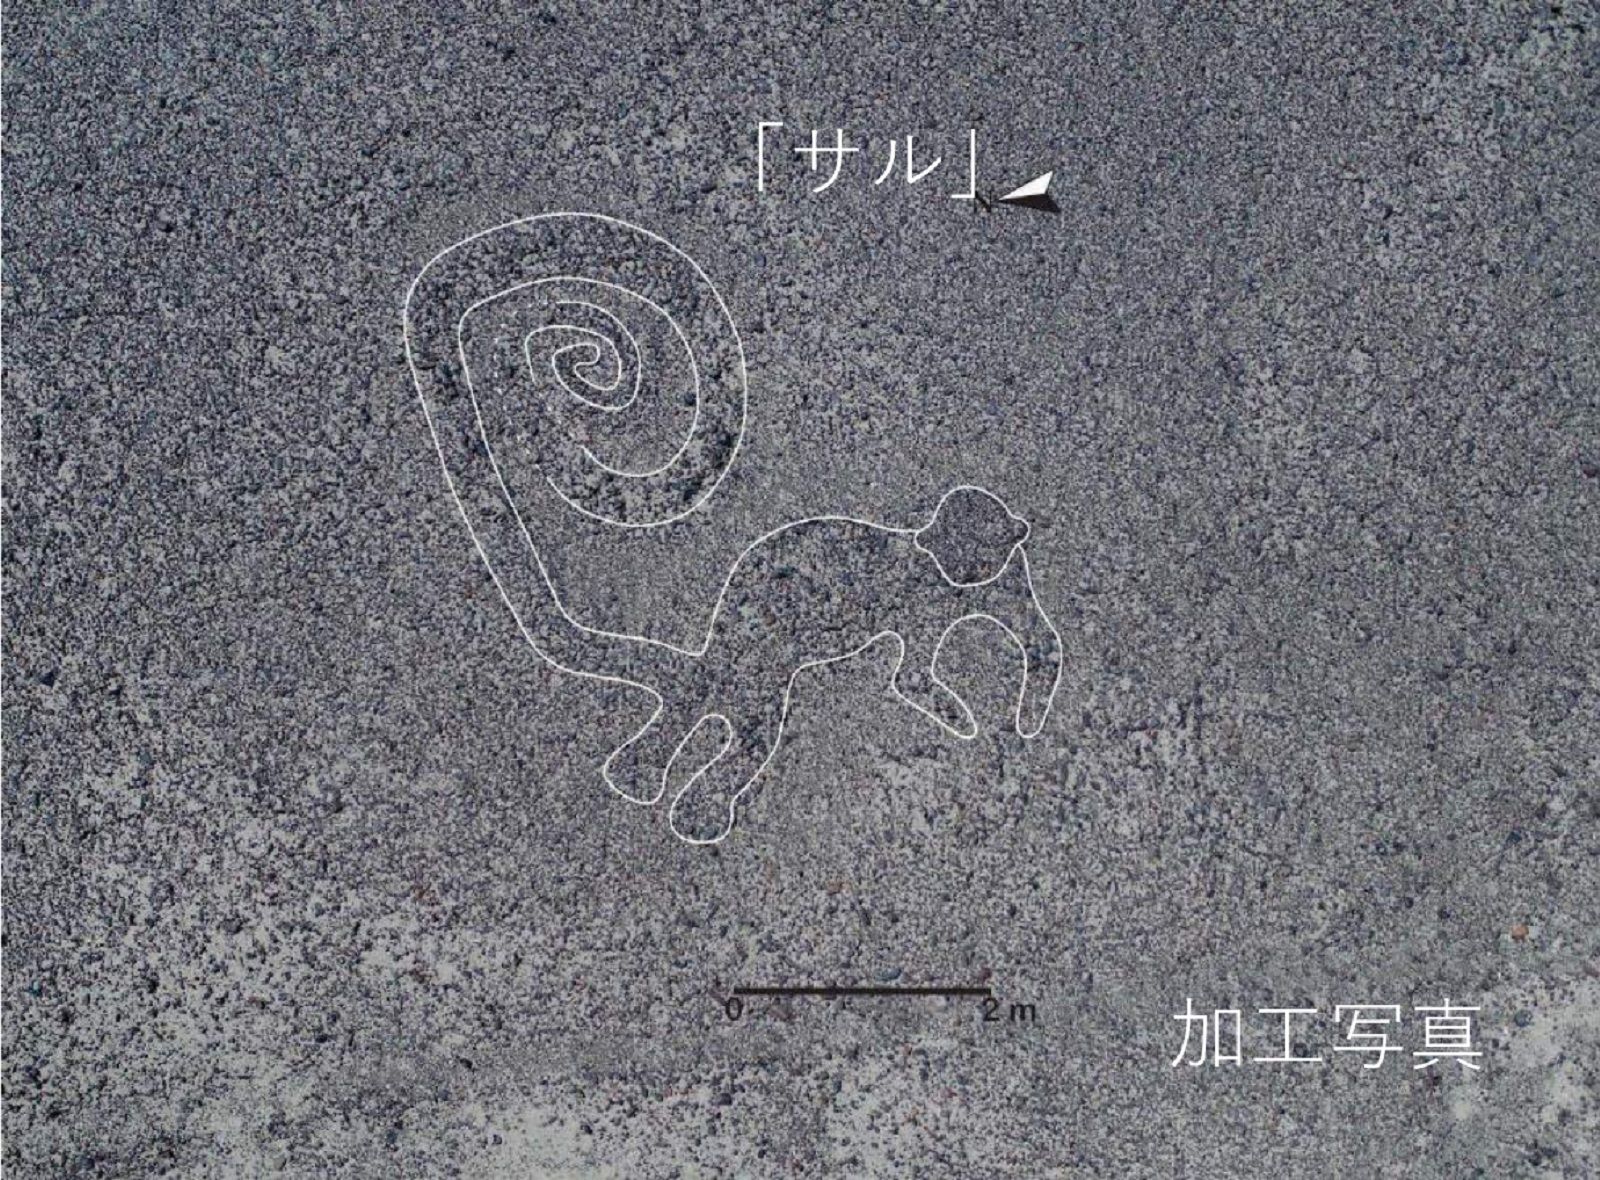 Scientists use IBM AI to discover mysterious drawings in Peru image 19